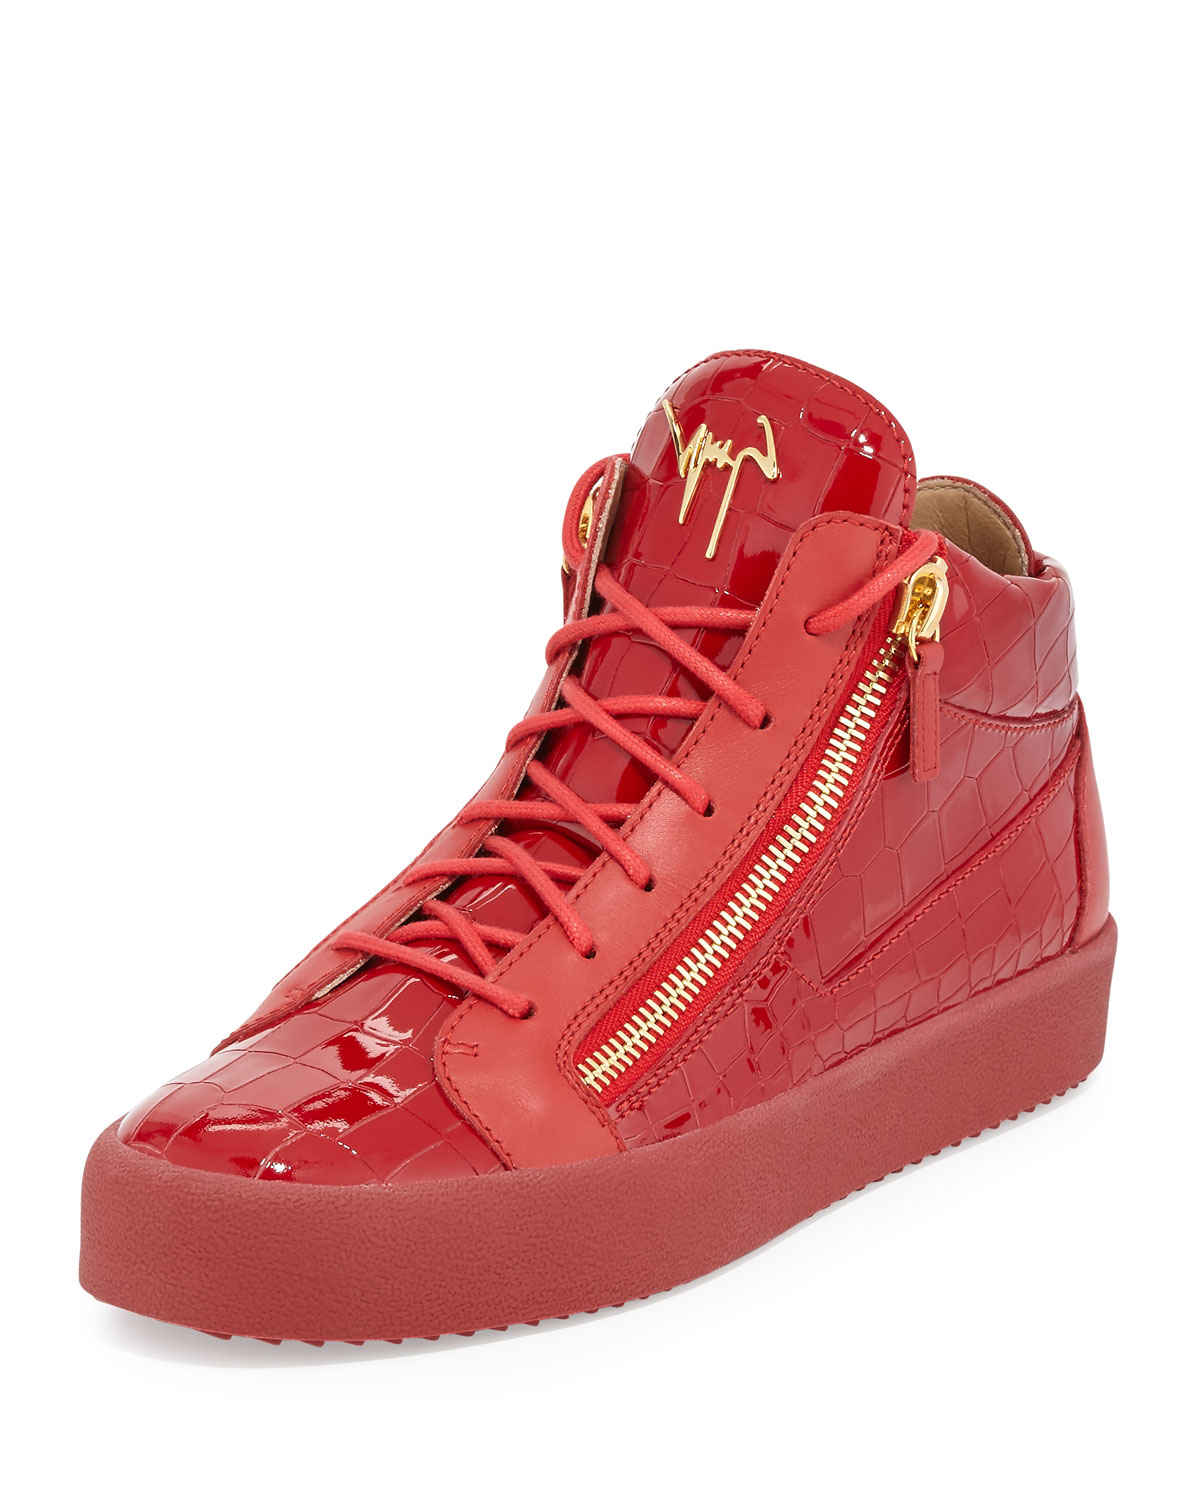 Lyst - Giuseppe Zanotti Croc-Embossed Leather Mid-Top Sneakers in Red ...